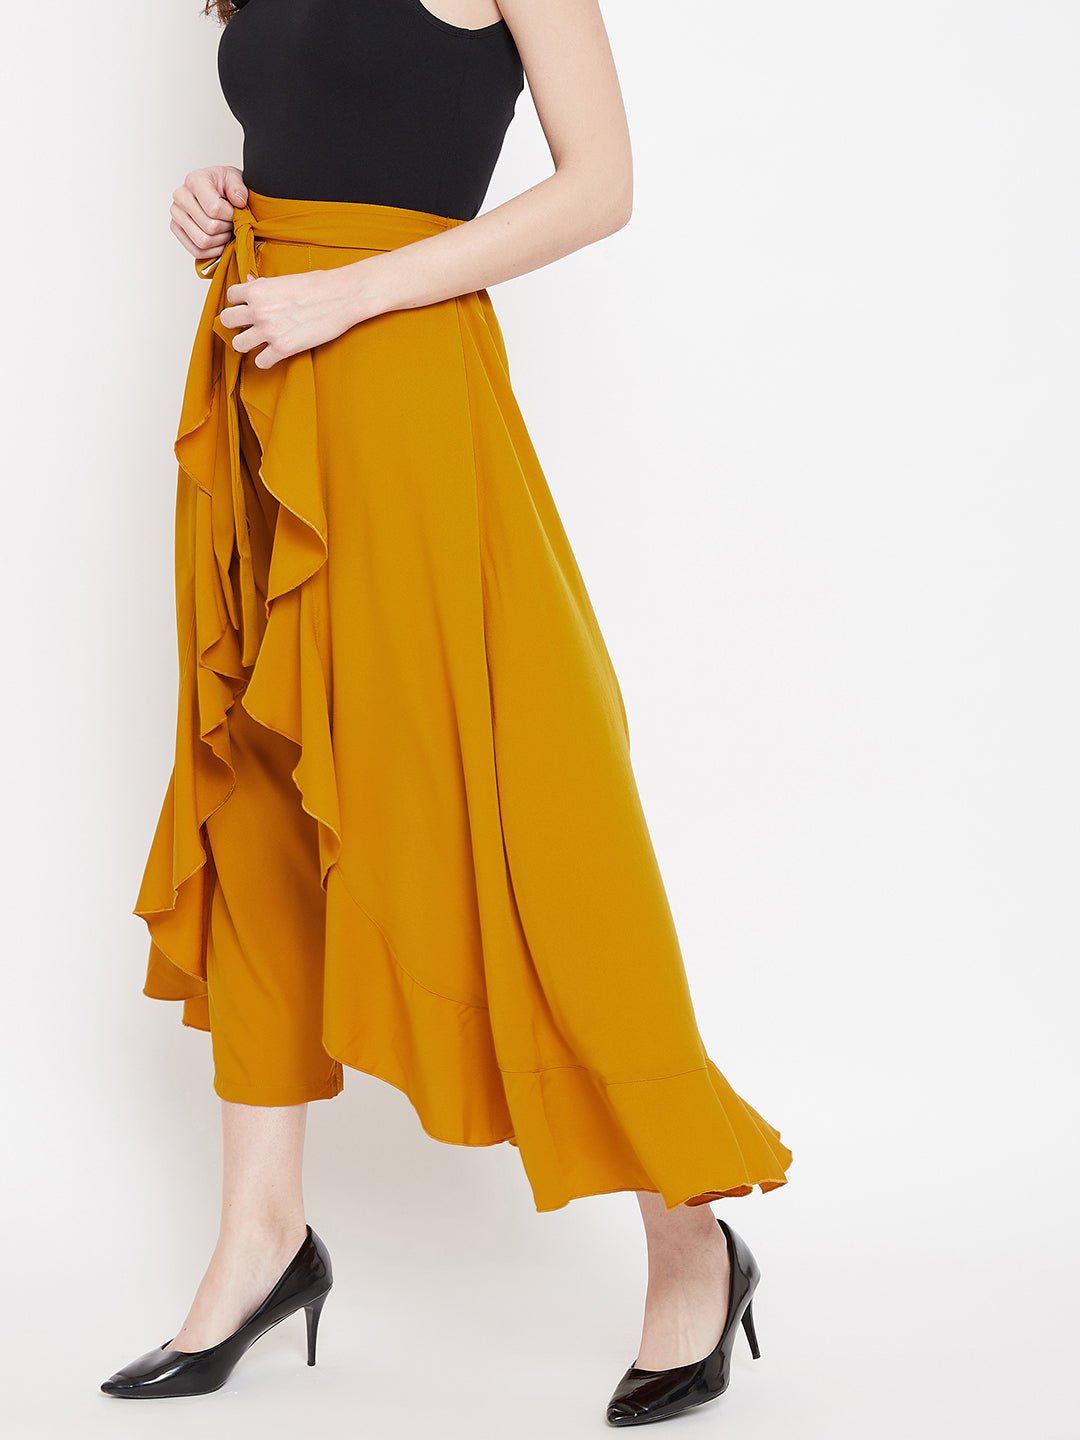 Folk Republic Women Solid Mustard Yellow Waist Tie-Up High-Low Flared Maxi Skirt with Attached Trousers - #folk republic#